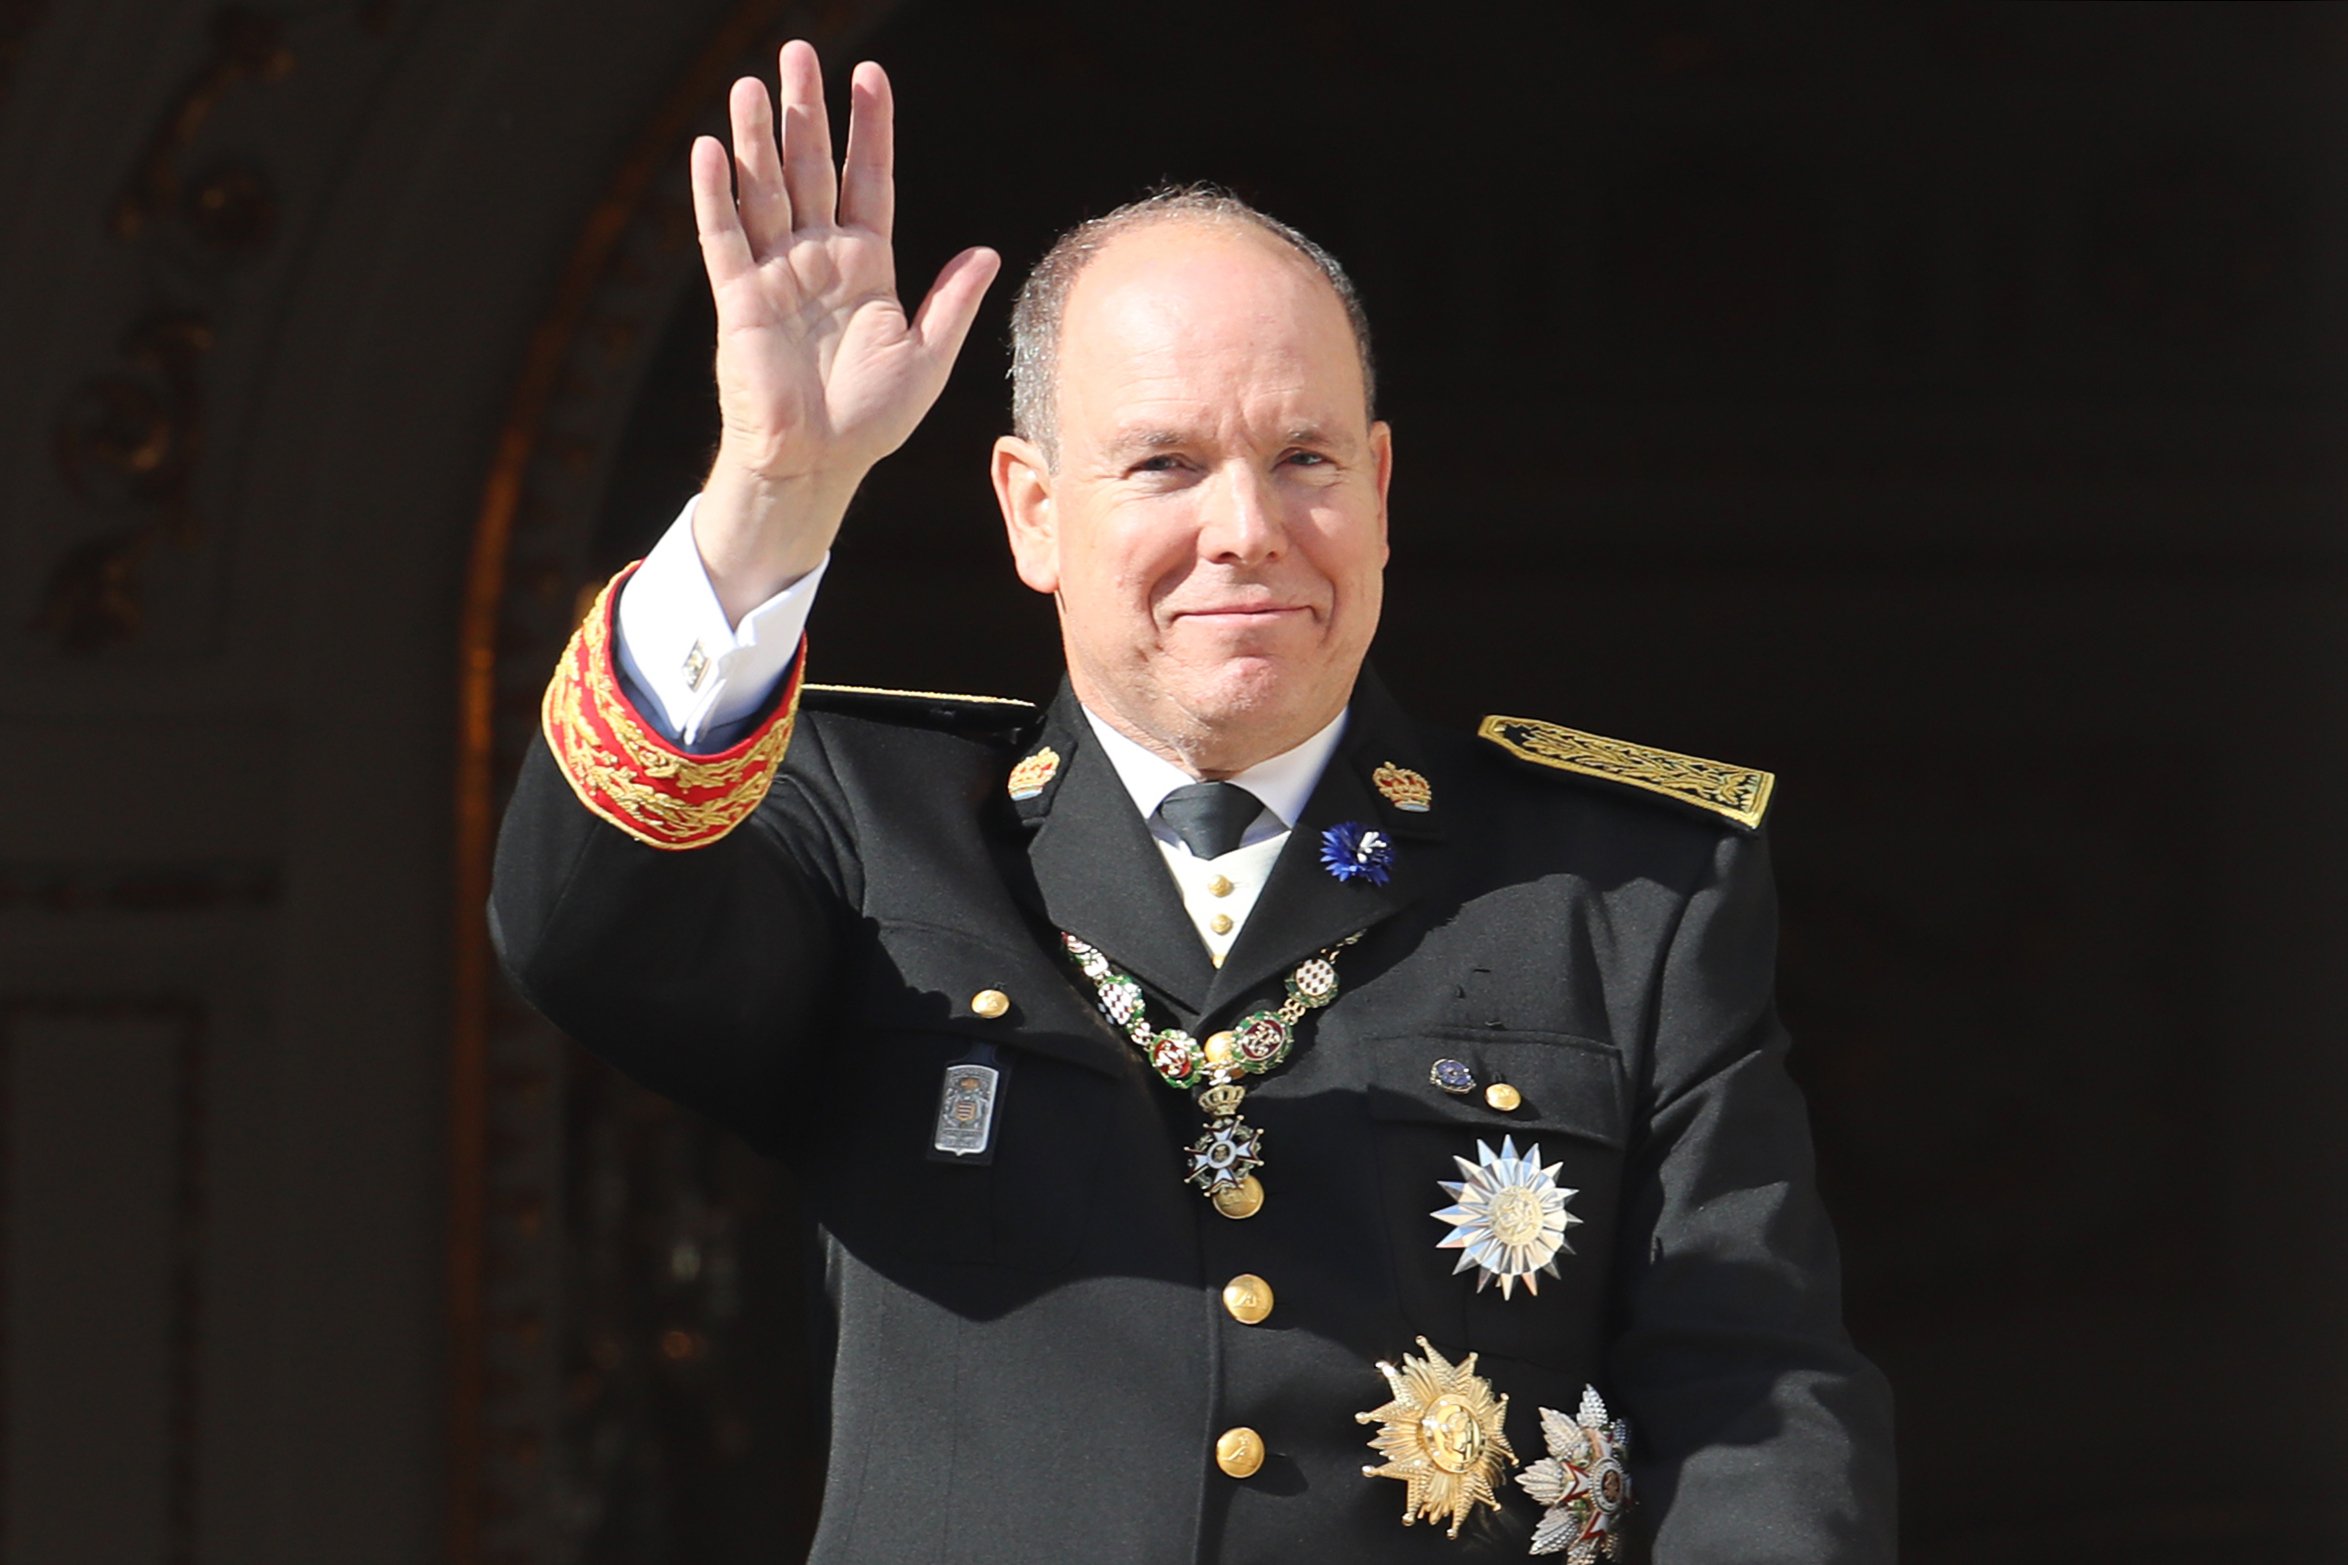 Prince Albert II of Monaco waves as he appears on the balcony of the Monaco Palace during the celebrations marking Monaco's National Day, on November 19, 2018 in Monaco. | Source: Getty Images